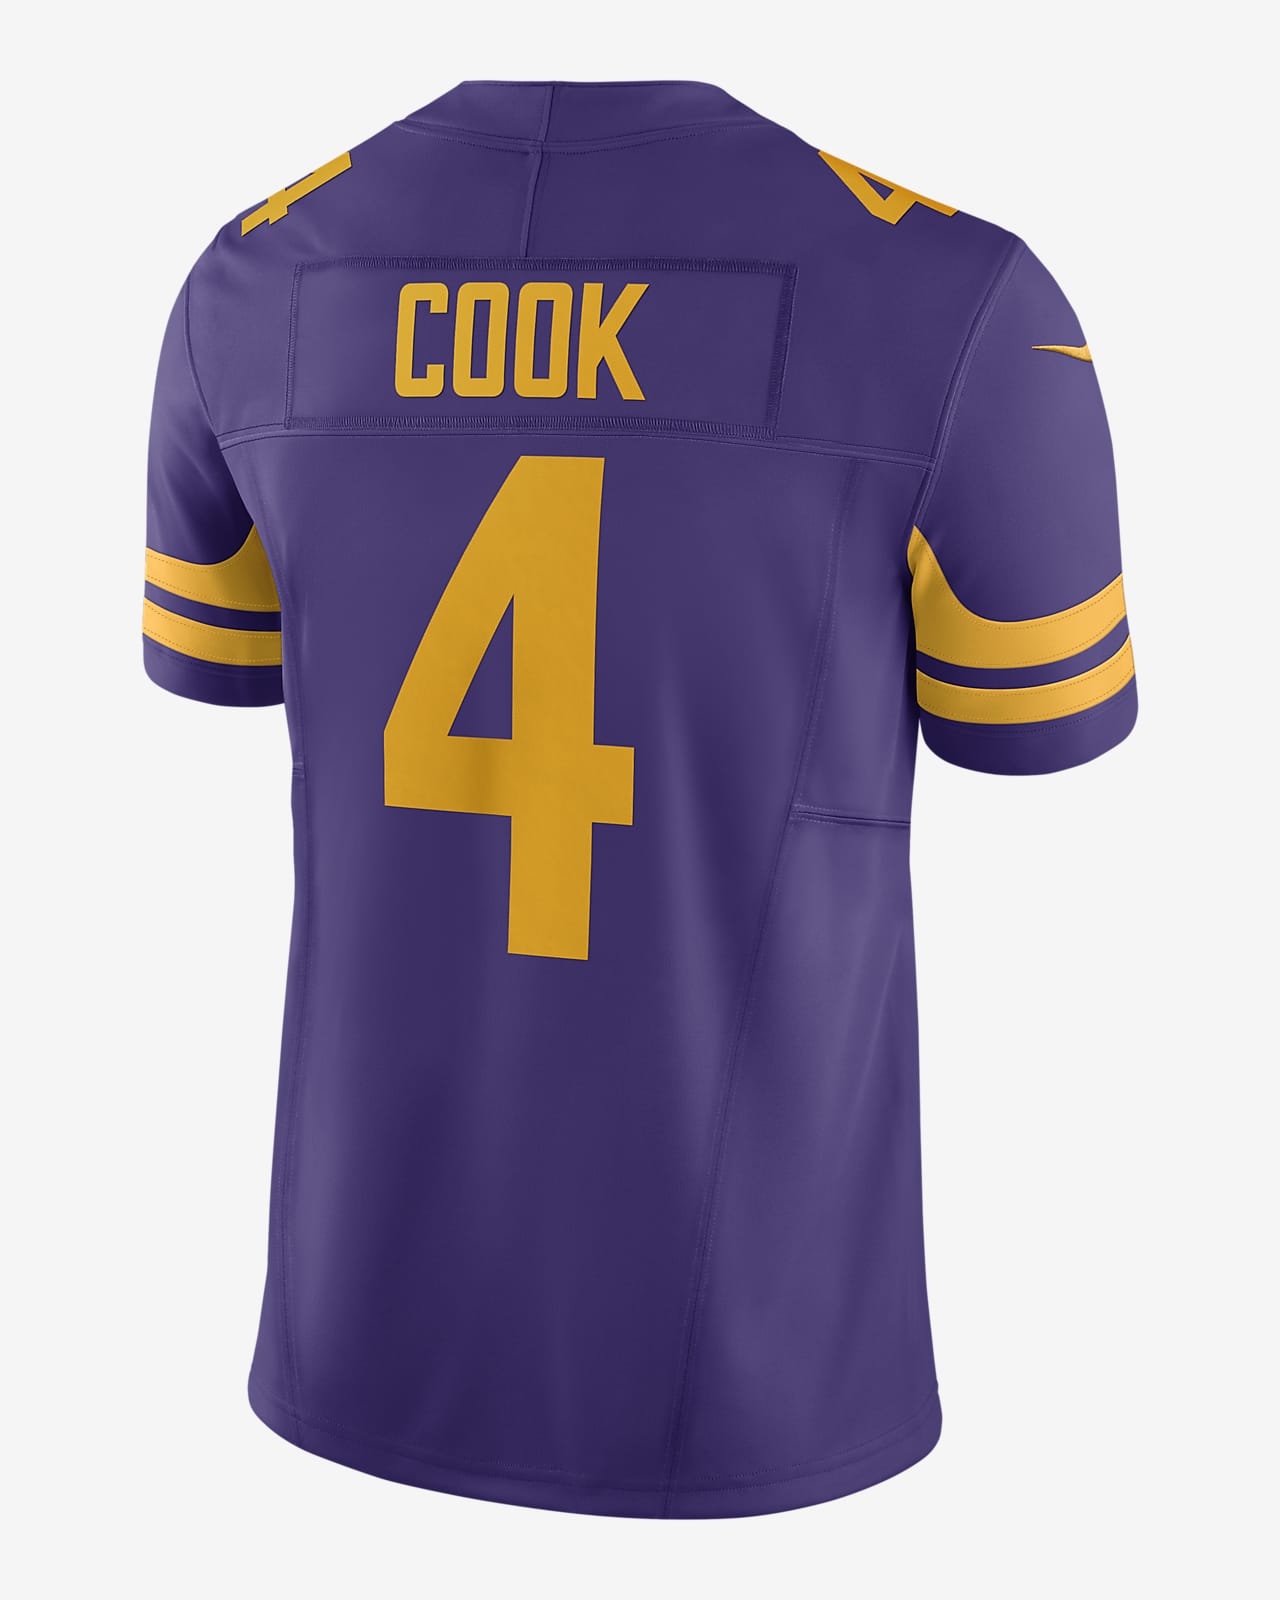 dalvin cook limited jersey